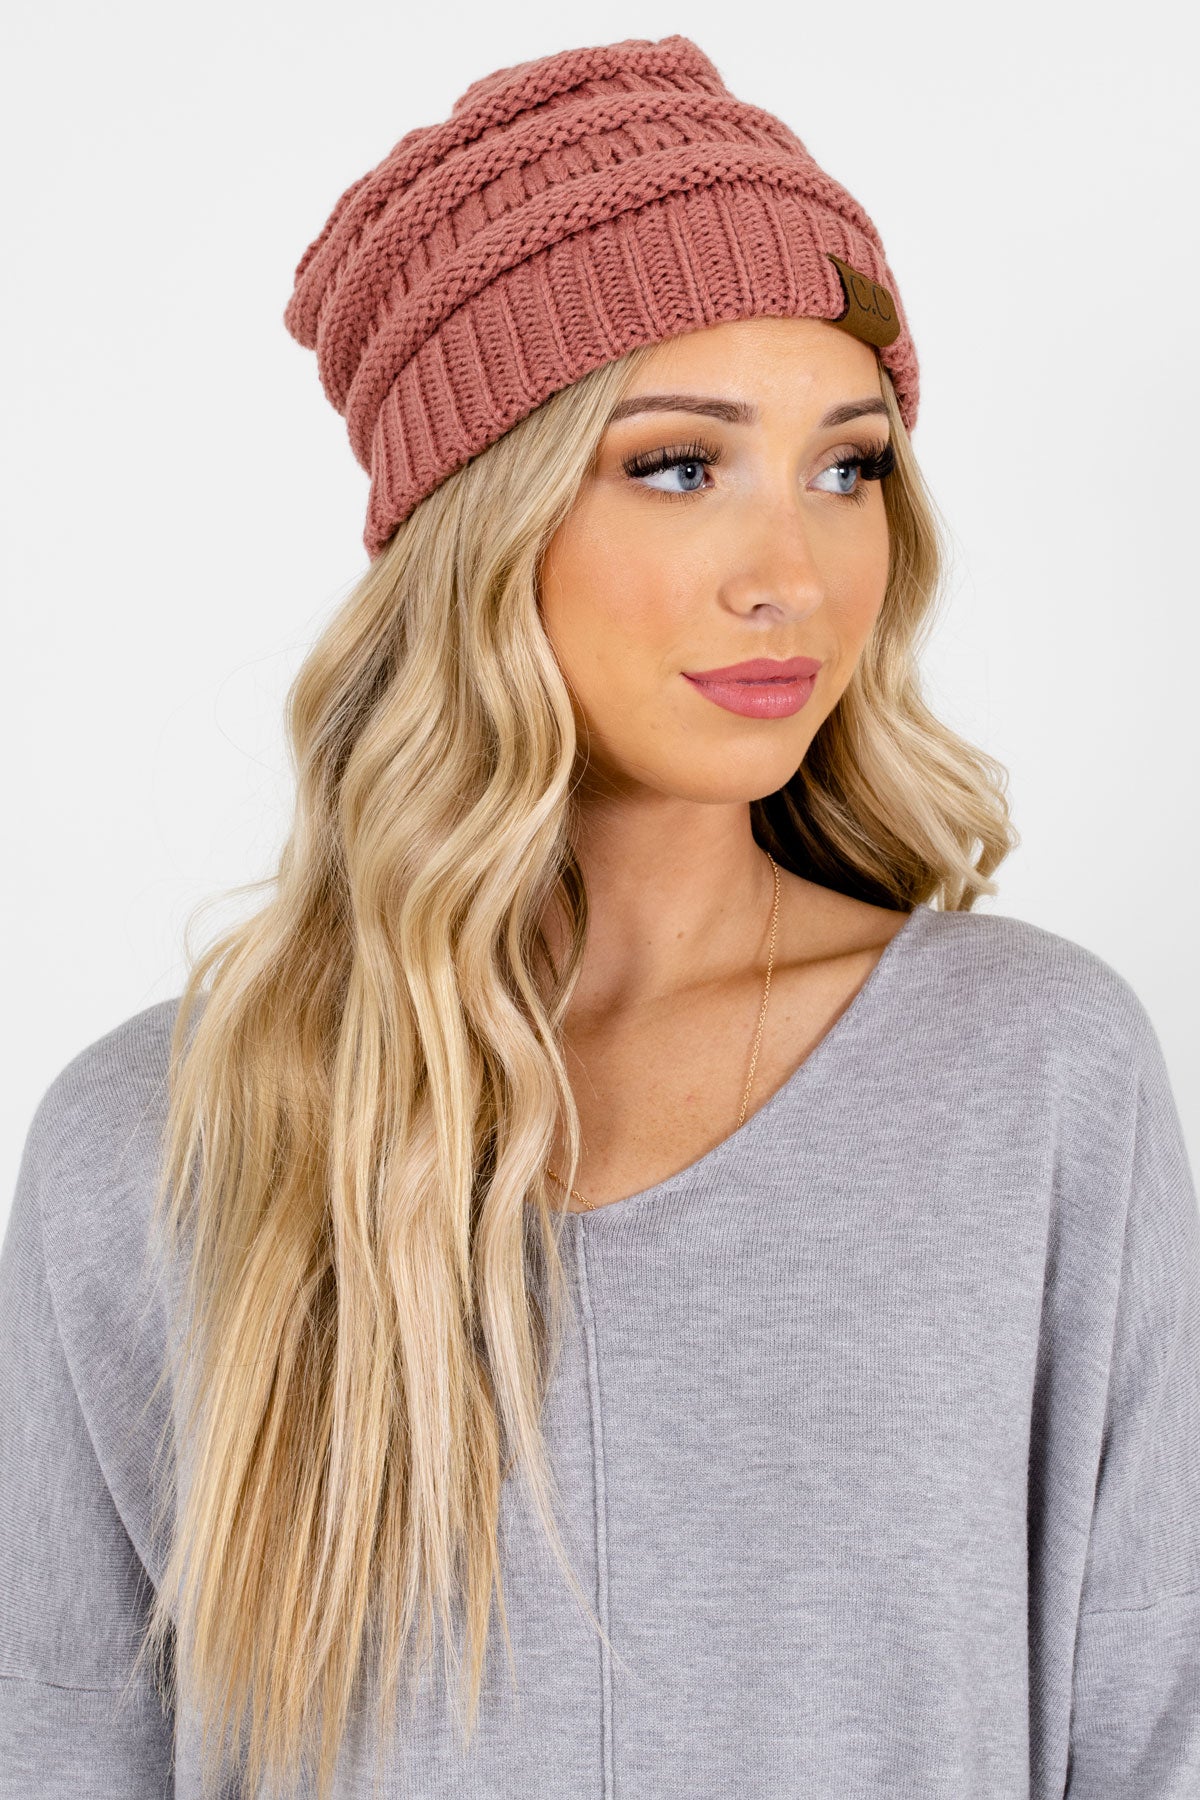 Pink High-Quality Knit Boutique Beanies for Women